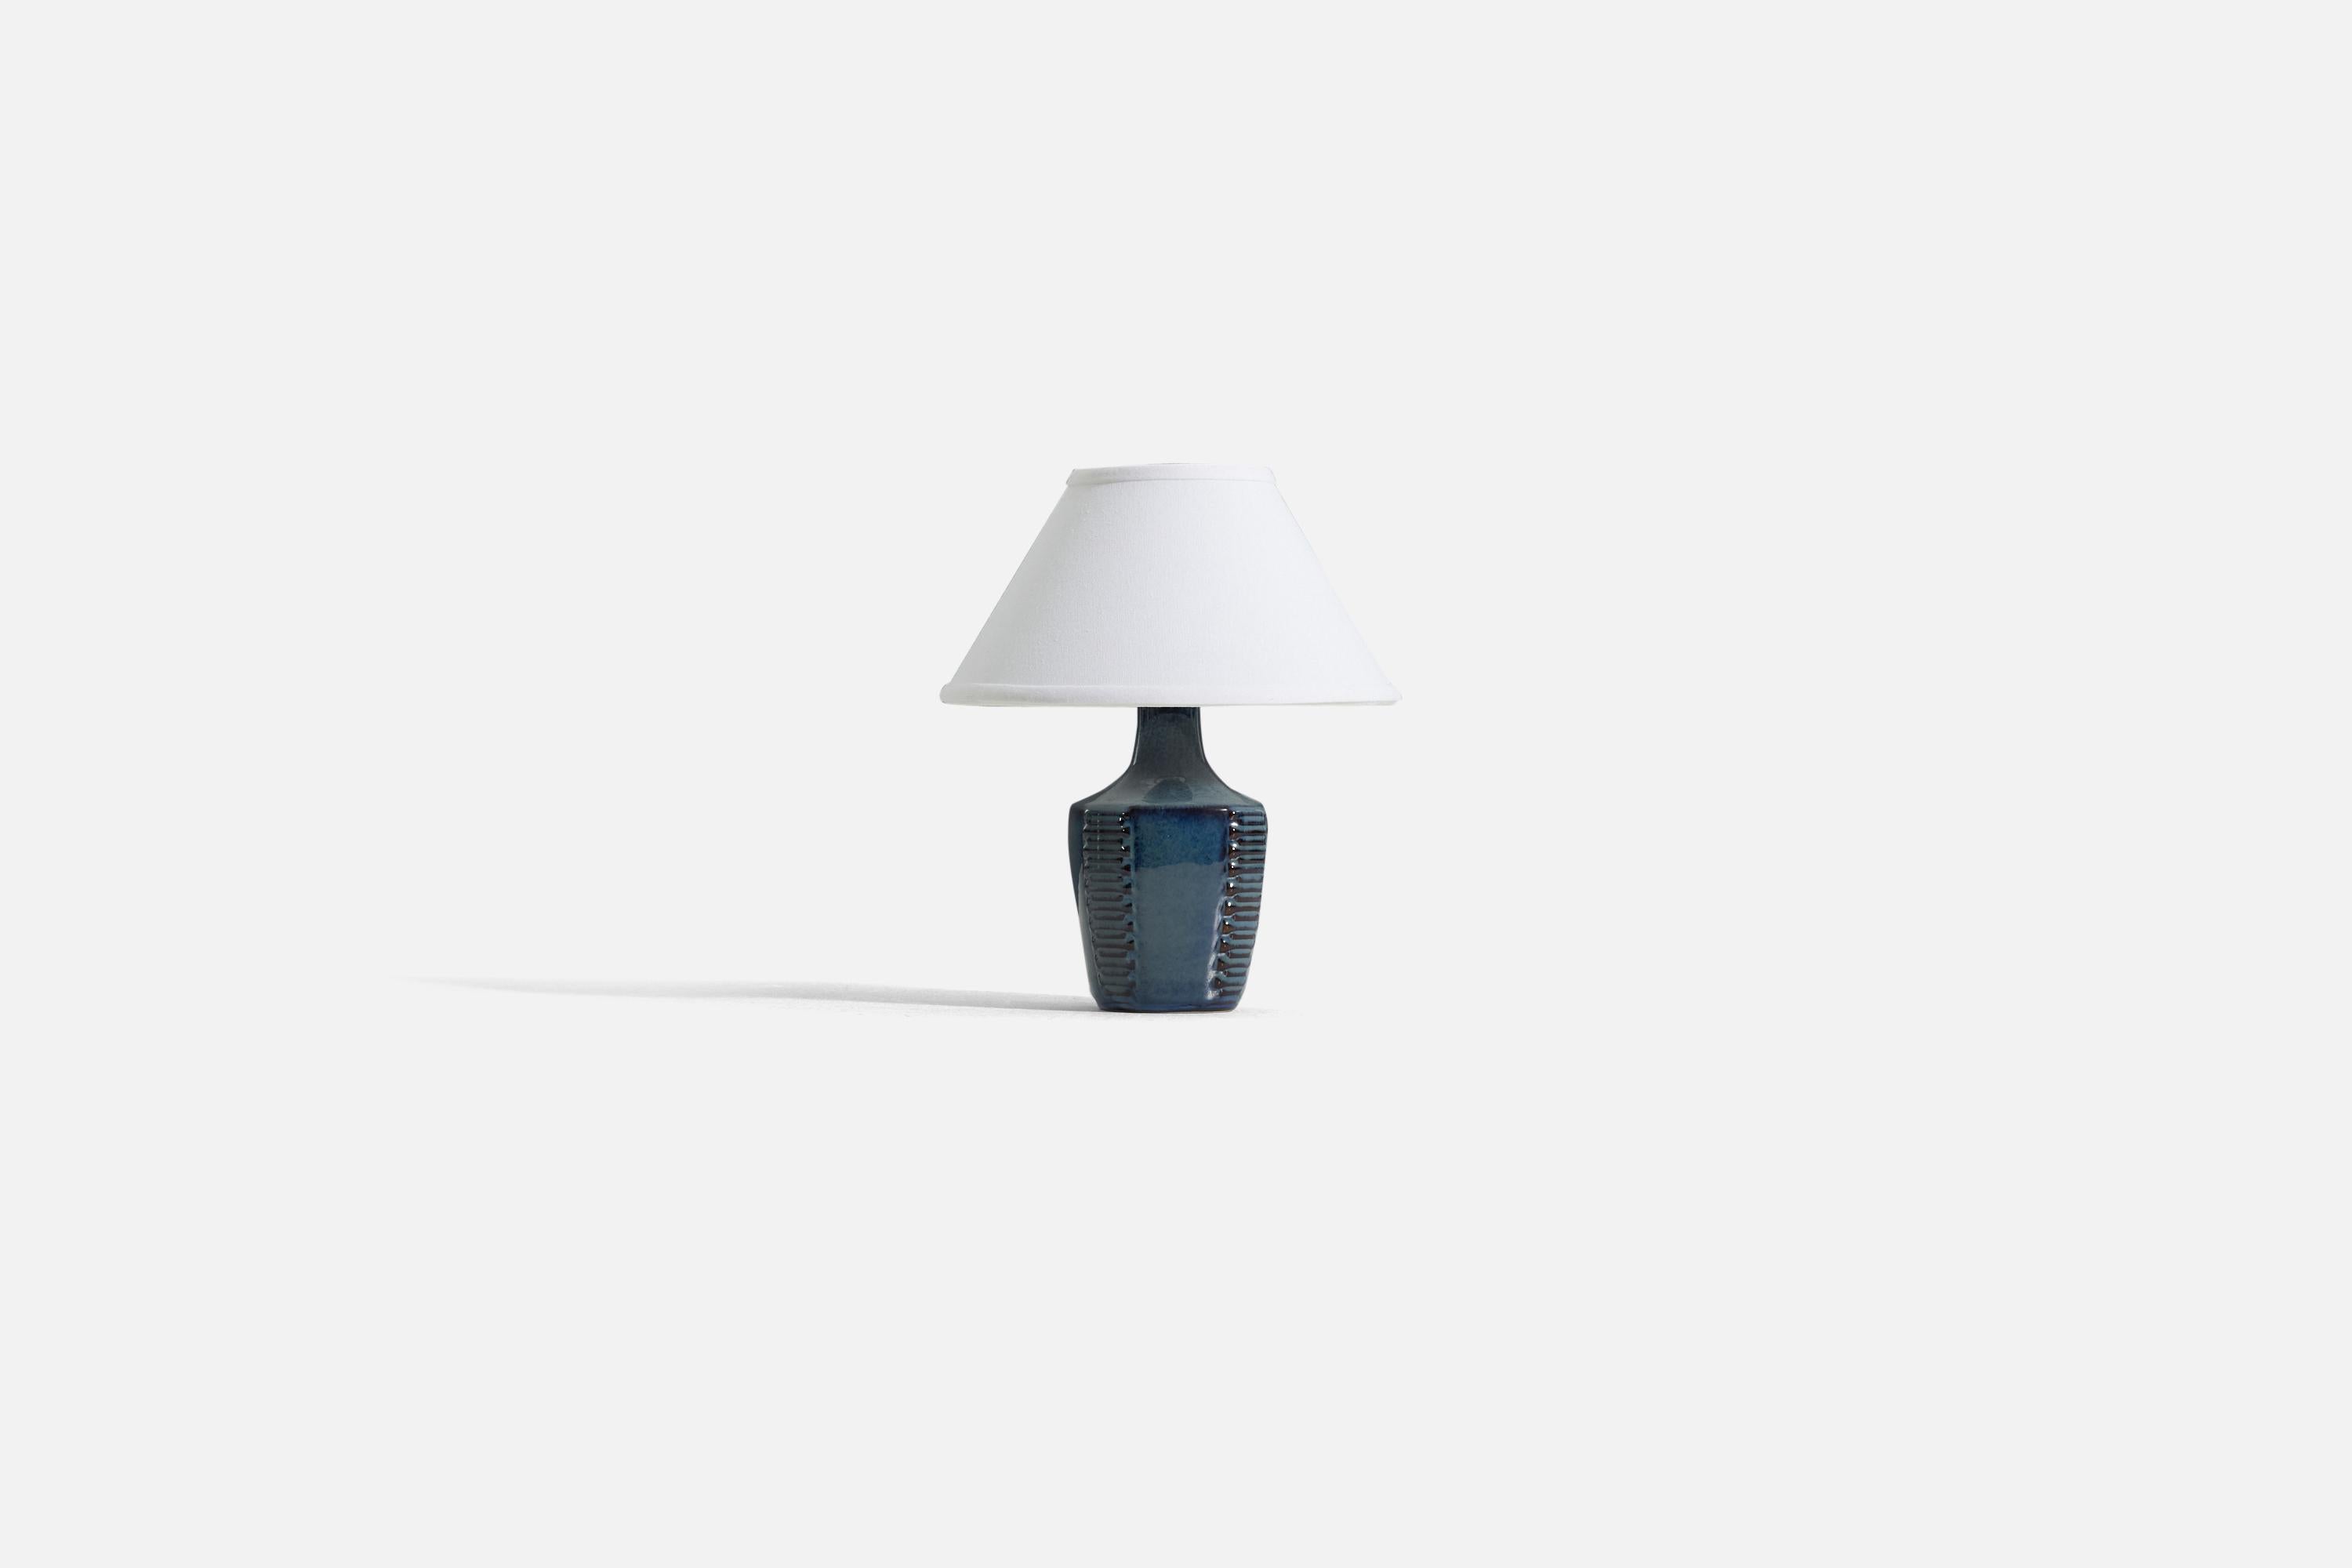 A blue glazed stoneware table lamp, produced by Søholm Stentøj, Denmark, 1960s.

Sold without lampshade. 

Dimensions of Lamp (inches) : 9.5 x 4.25 x 4.5 (H x W x D)
Dimensions Shade (inches) : 4.5 x 10.25 x 6 (T x B x H)
Dimension of Lamp